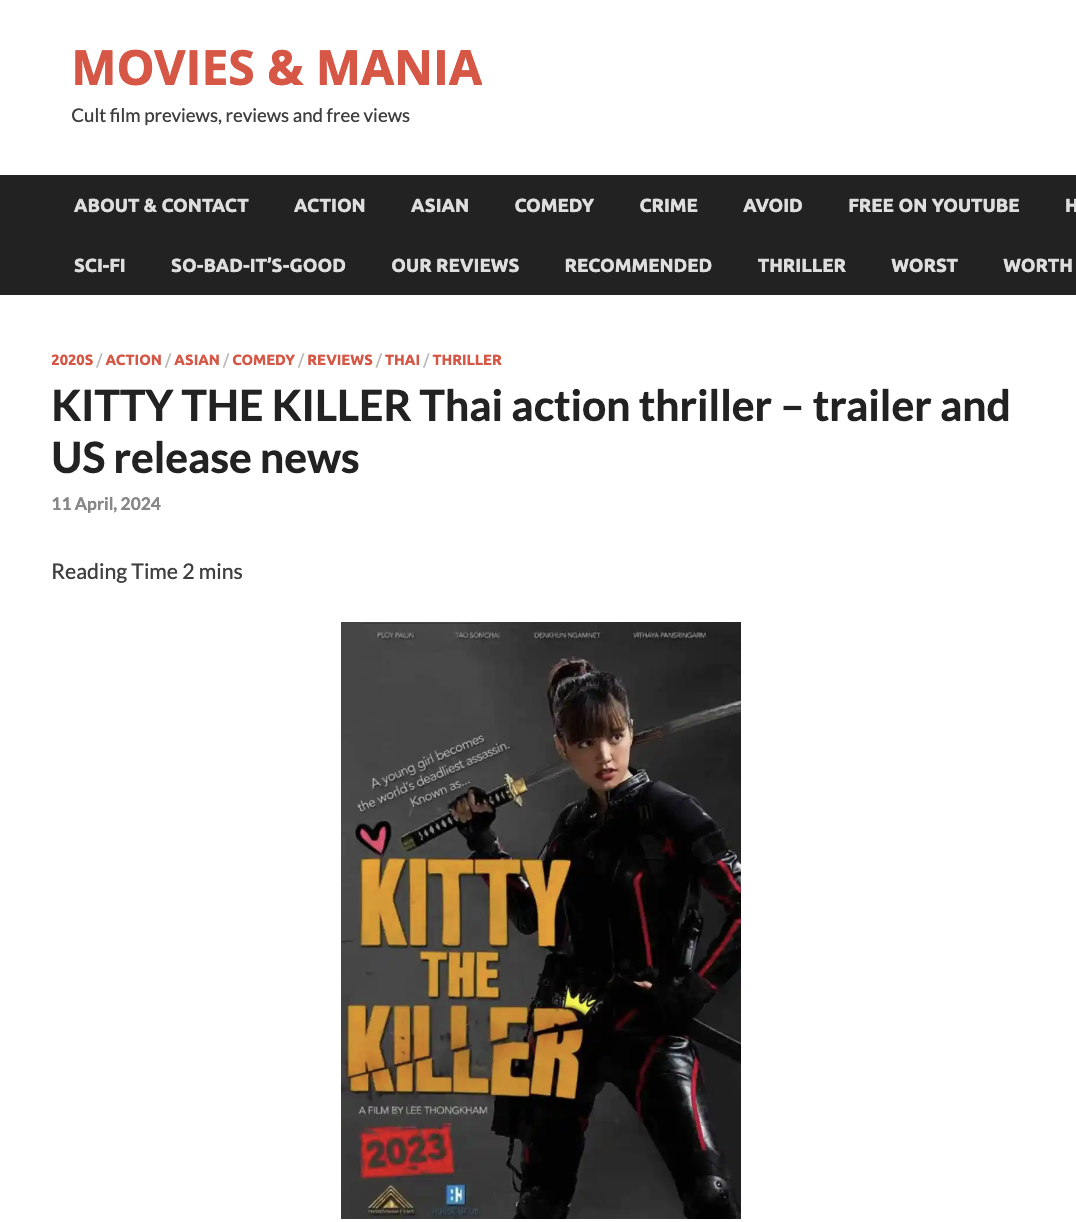 2020S / ACTION / ASIAN / COMEDY / REVIEWS / THAI / THRILLER KITTY THE KILLER Thai action thriller – trailer and US release news